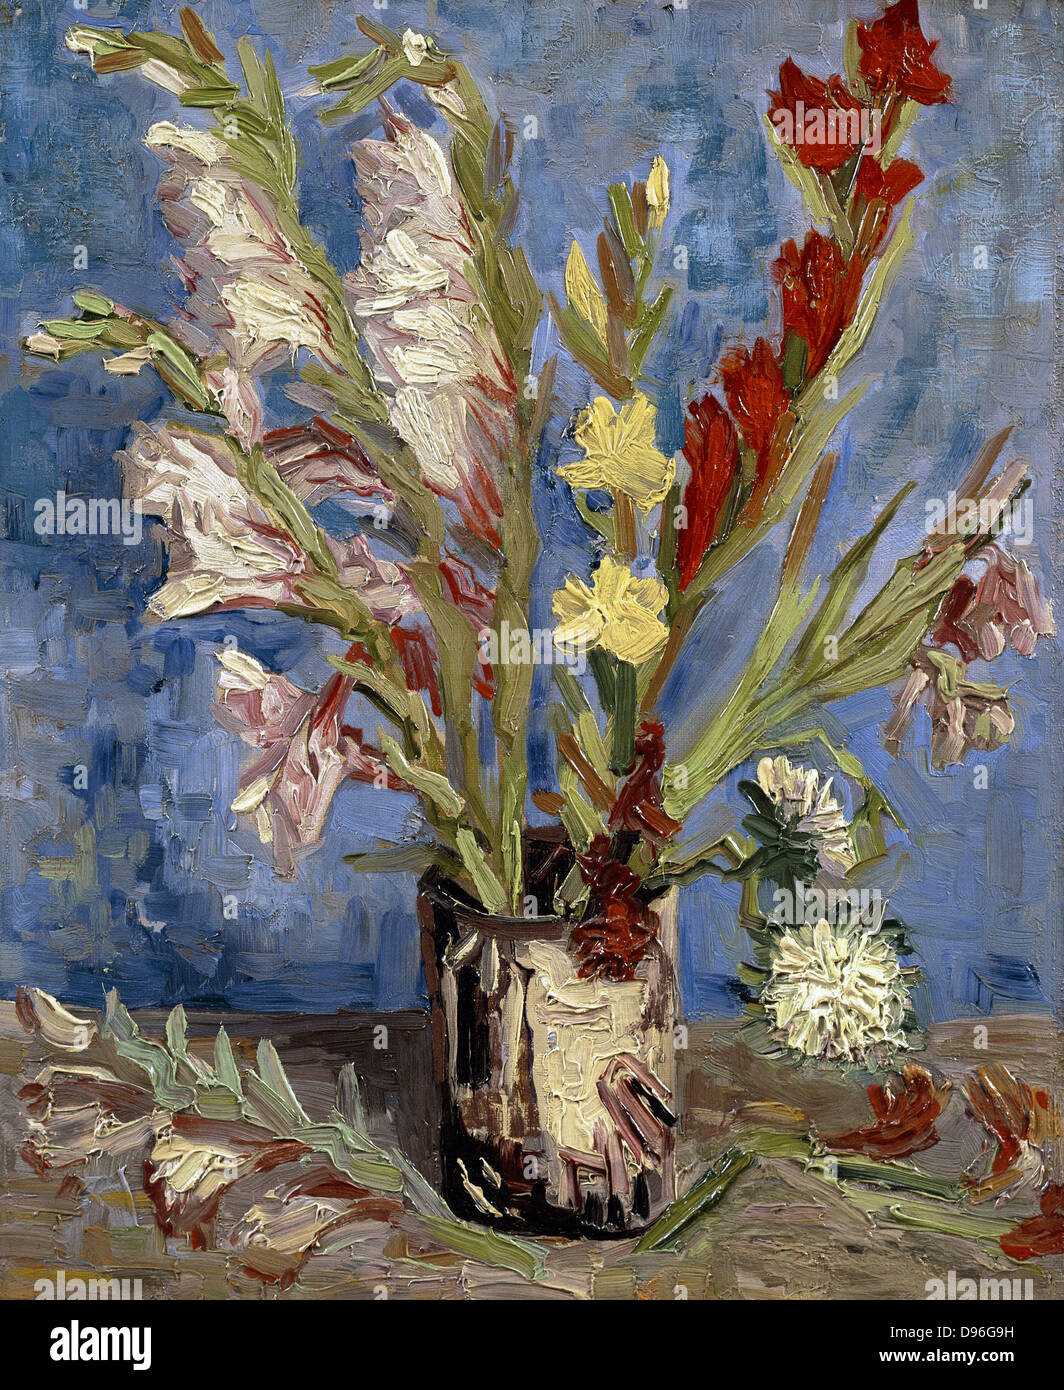 Vase with the gladioli and china asters. Oil on canvas. Painted by Vincent Van Gogh in 1886. Stock Photo